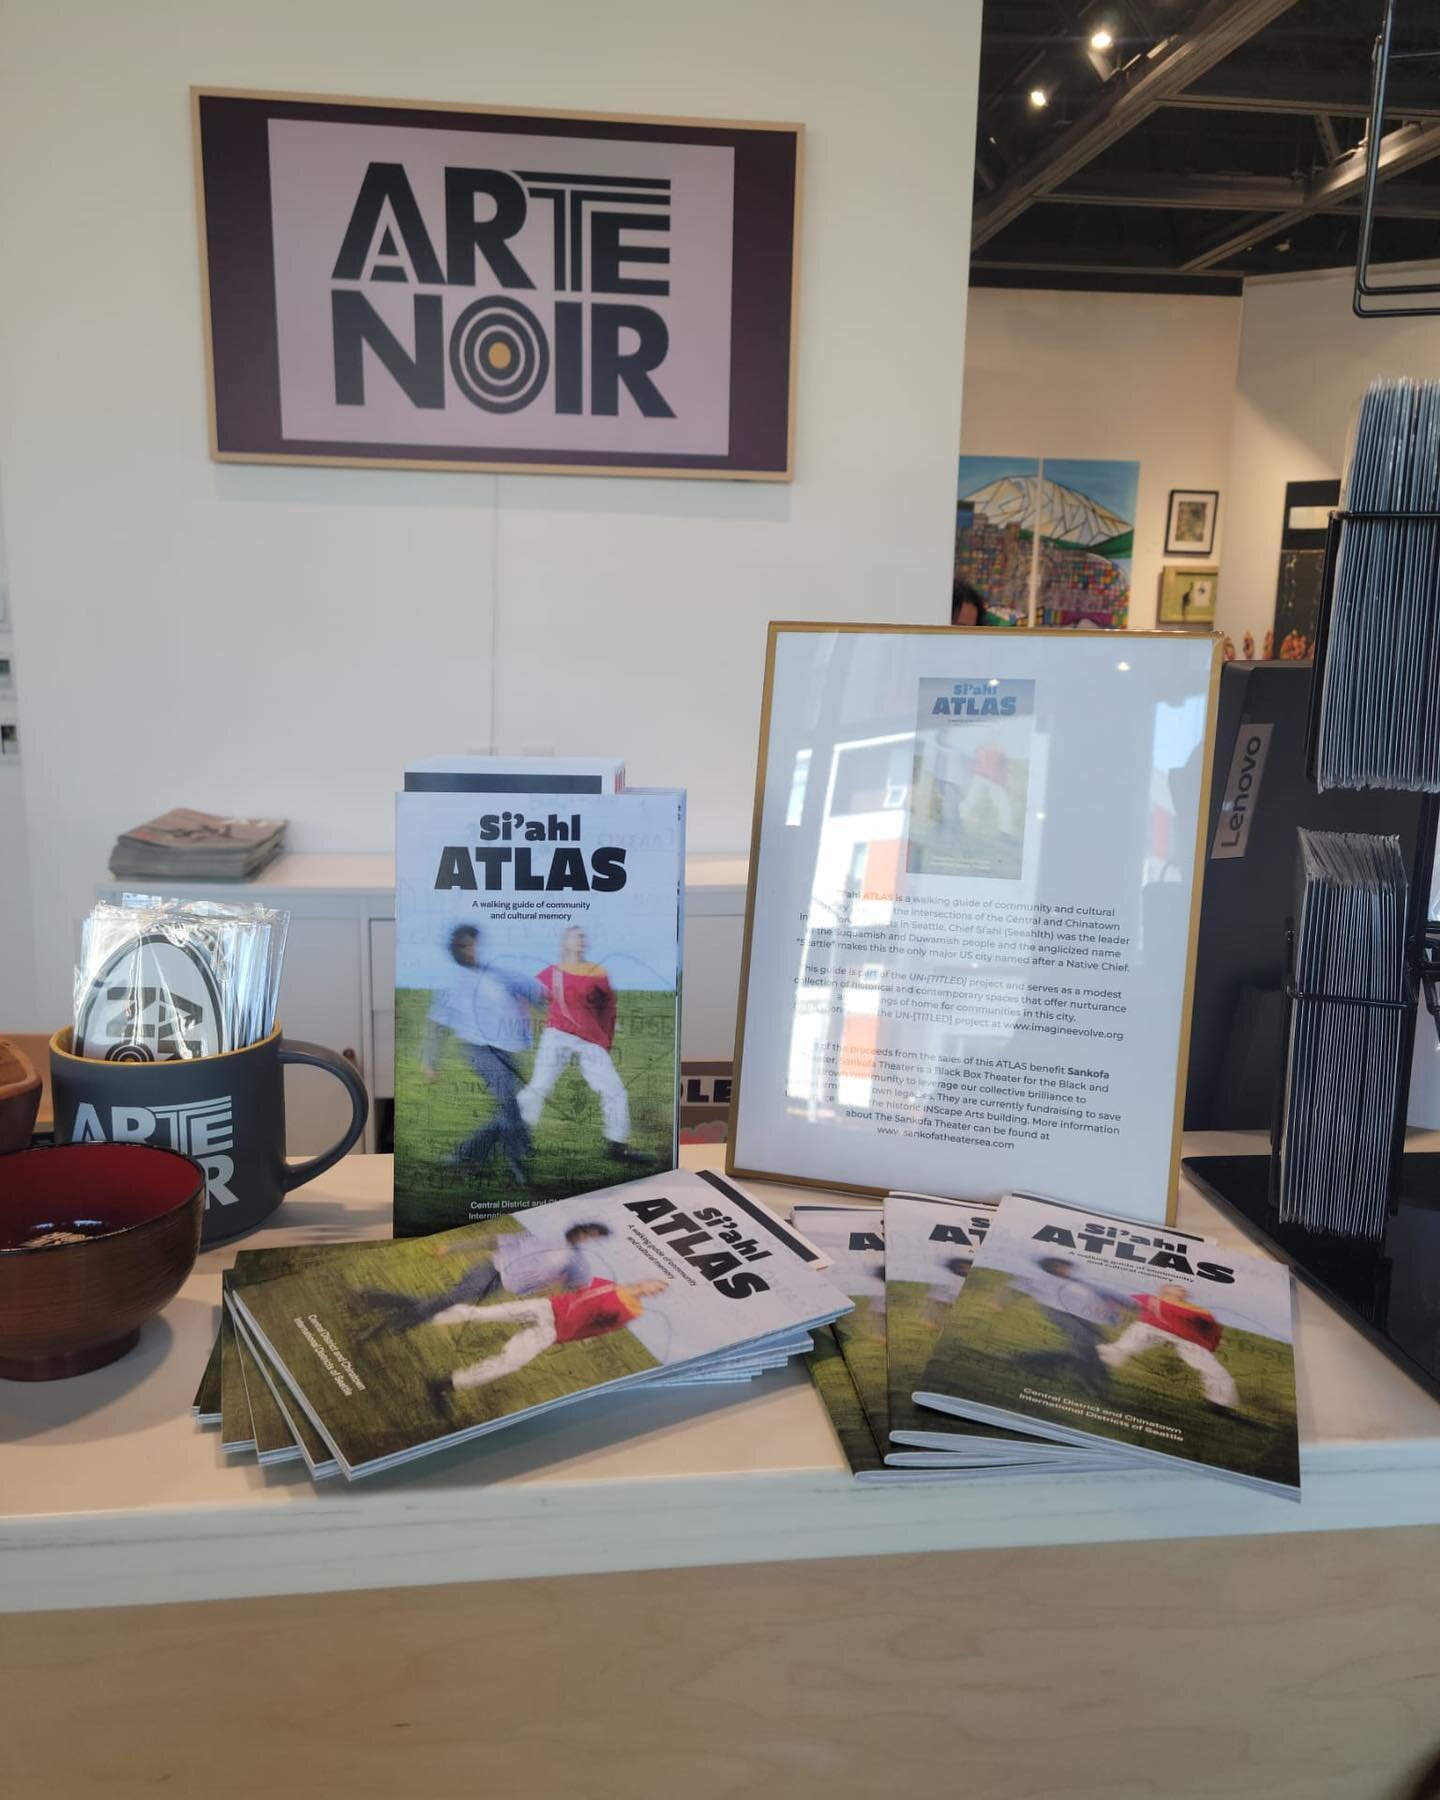 🌸 As the weather warms up, it&rsquo;s a perfect time to take a reflective stroll through important Seattle sites past and present &ndash; you can now pick up our Si&rsquo;ahl ATLAS walking guide at @artenoirnow !! 

The Si&rsquo;ahl ATLAS is a walki